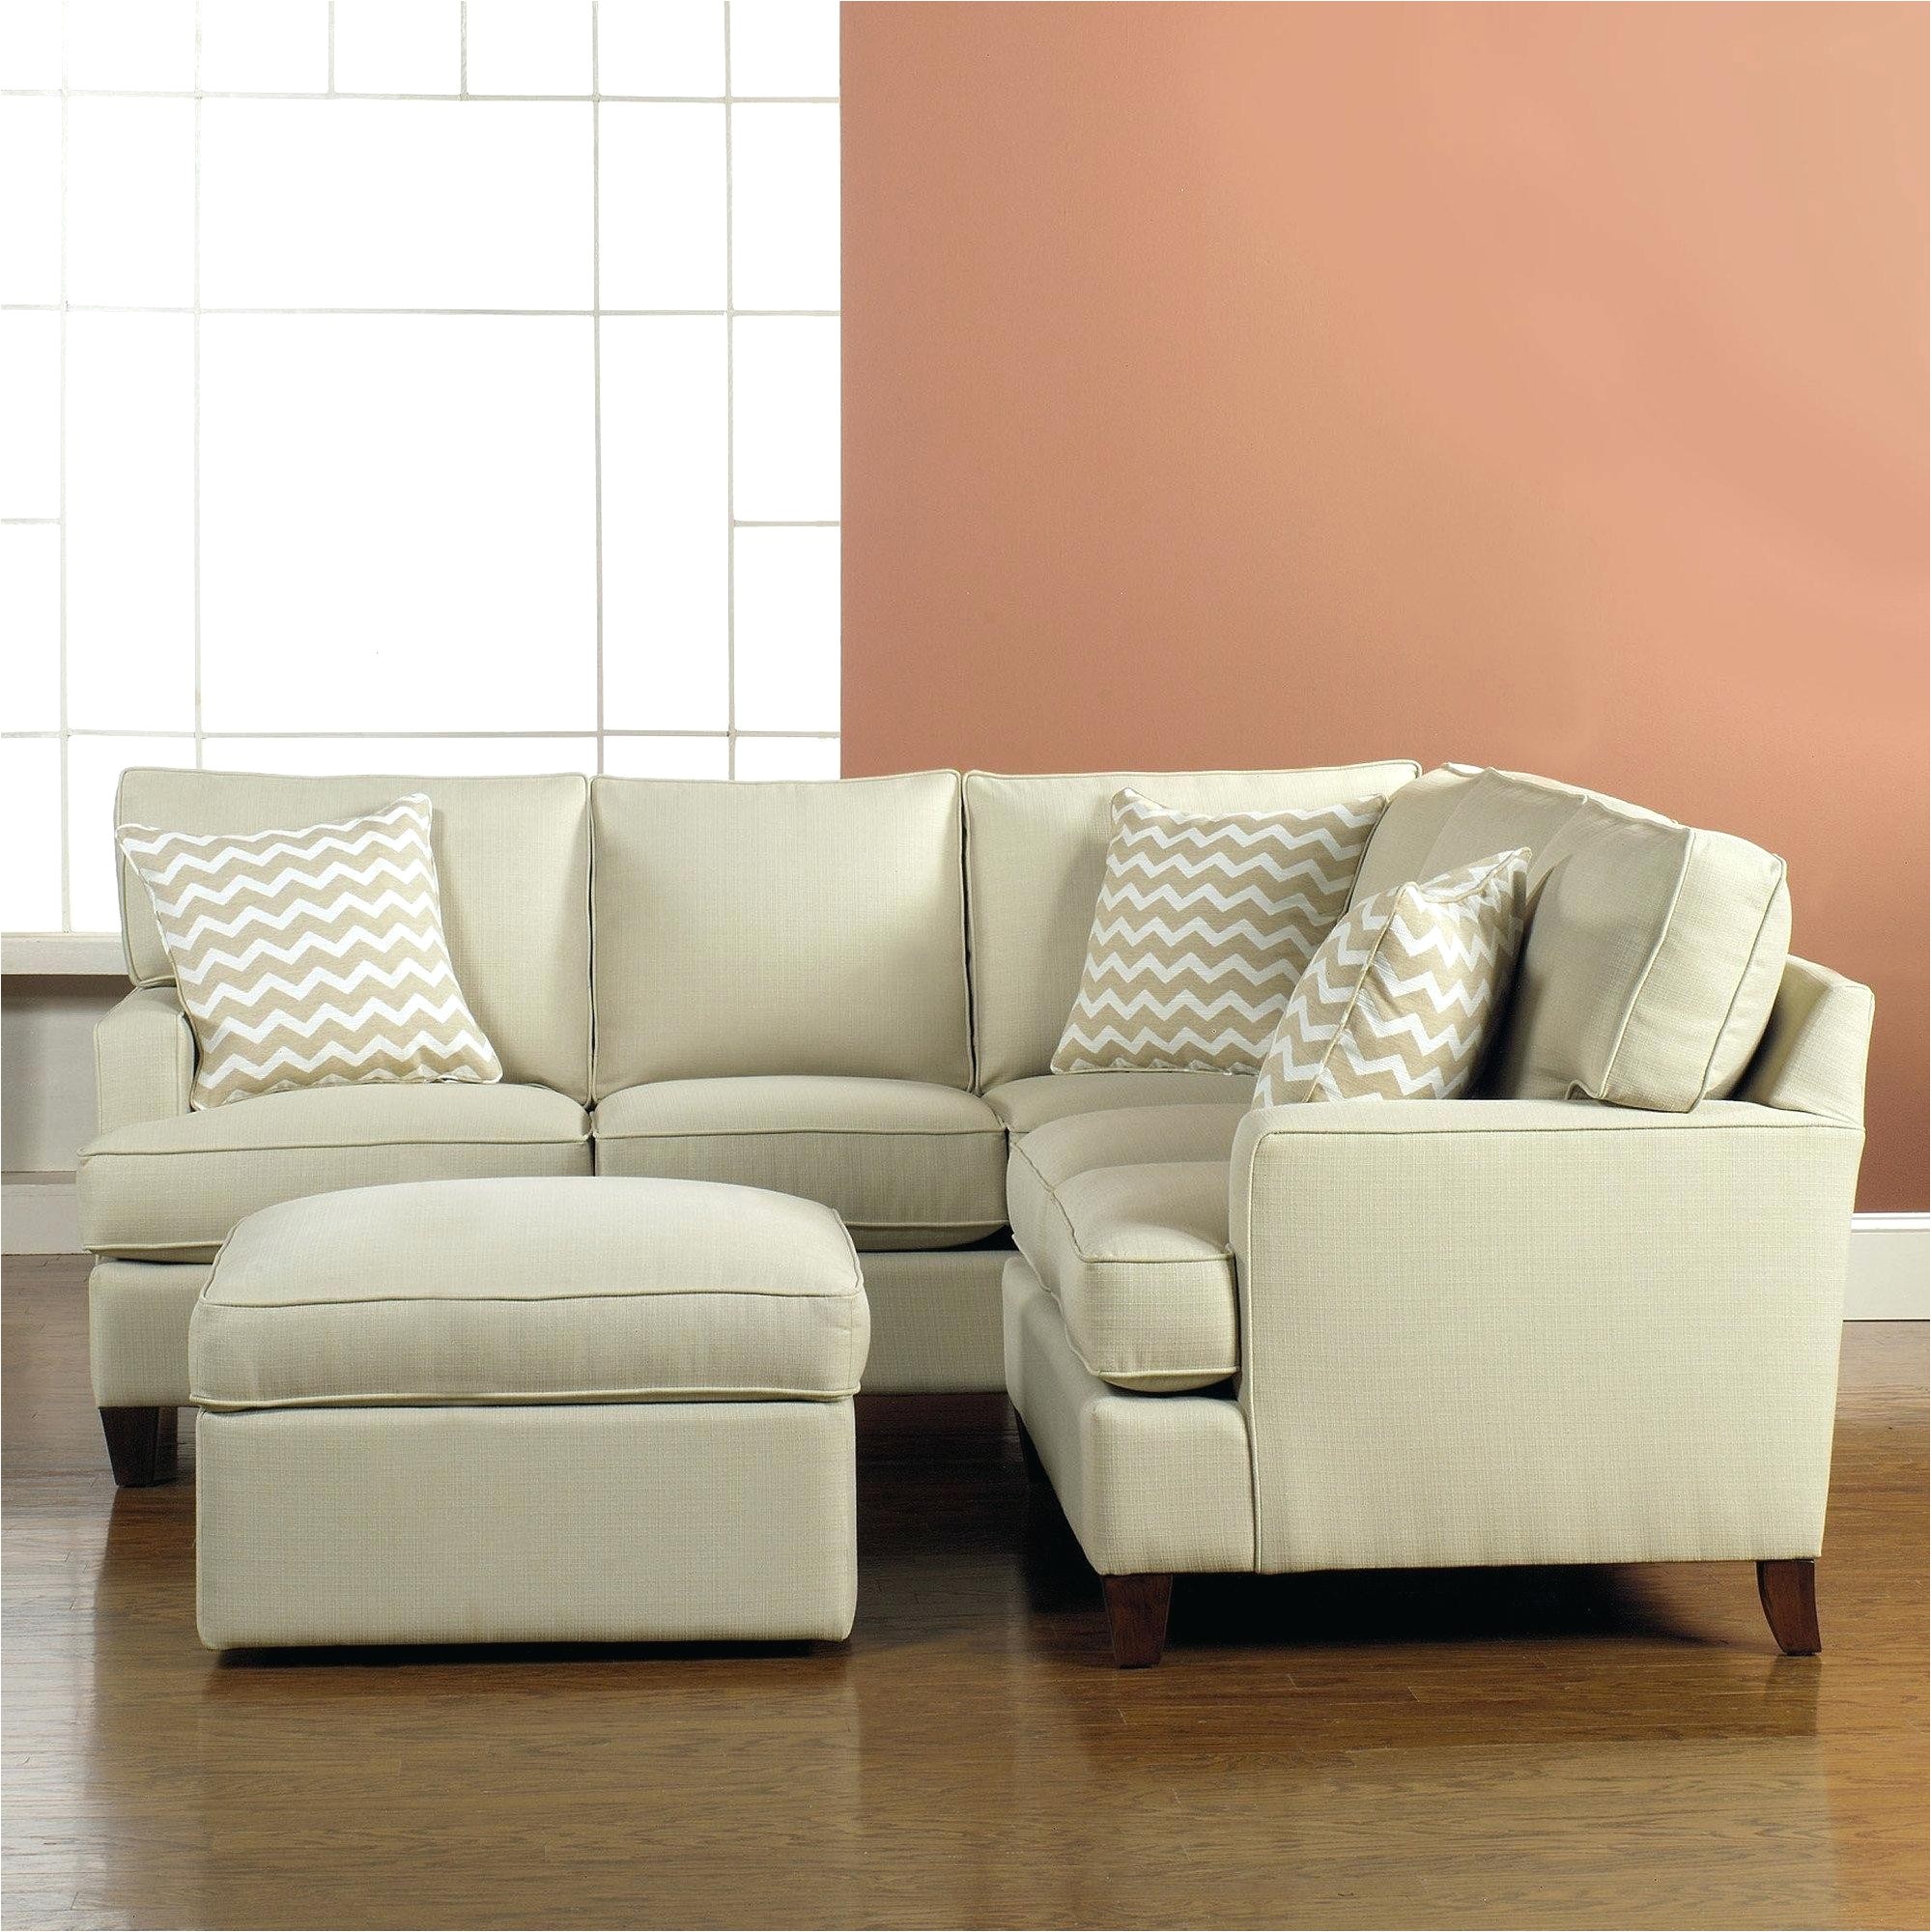 craigslist vancouver sofa and loveseat cheap sectional couches for sale sa sas used sofas vancouver near me of craigslist vancouver sofa and loveseat